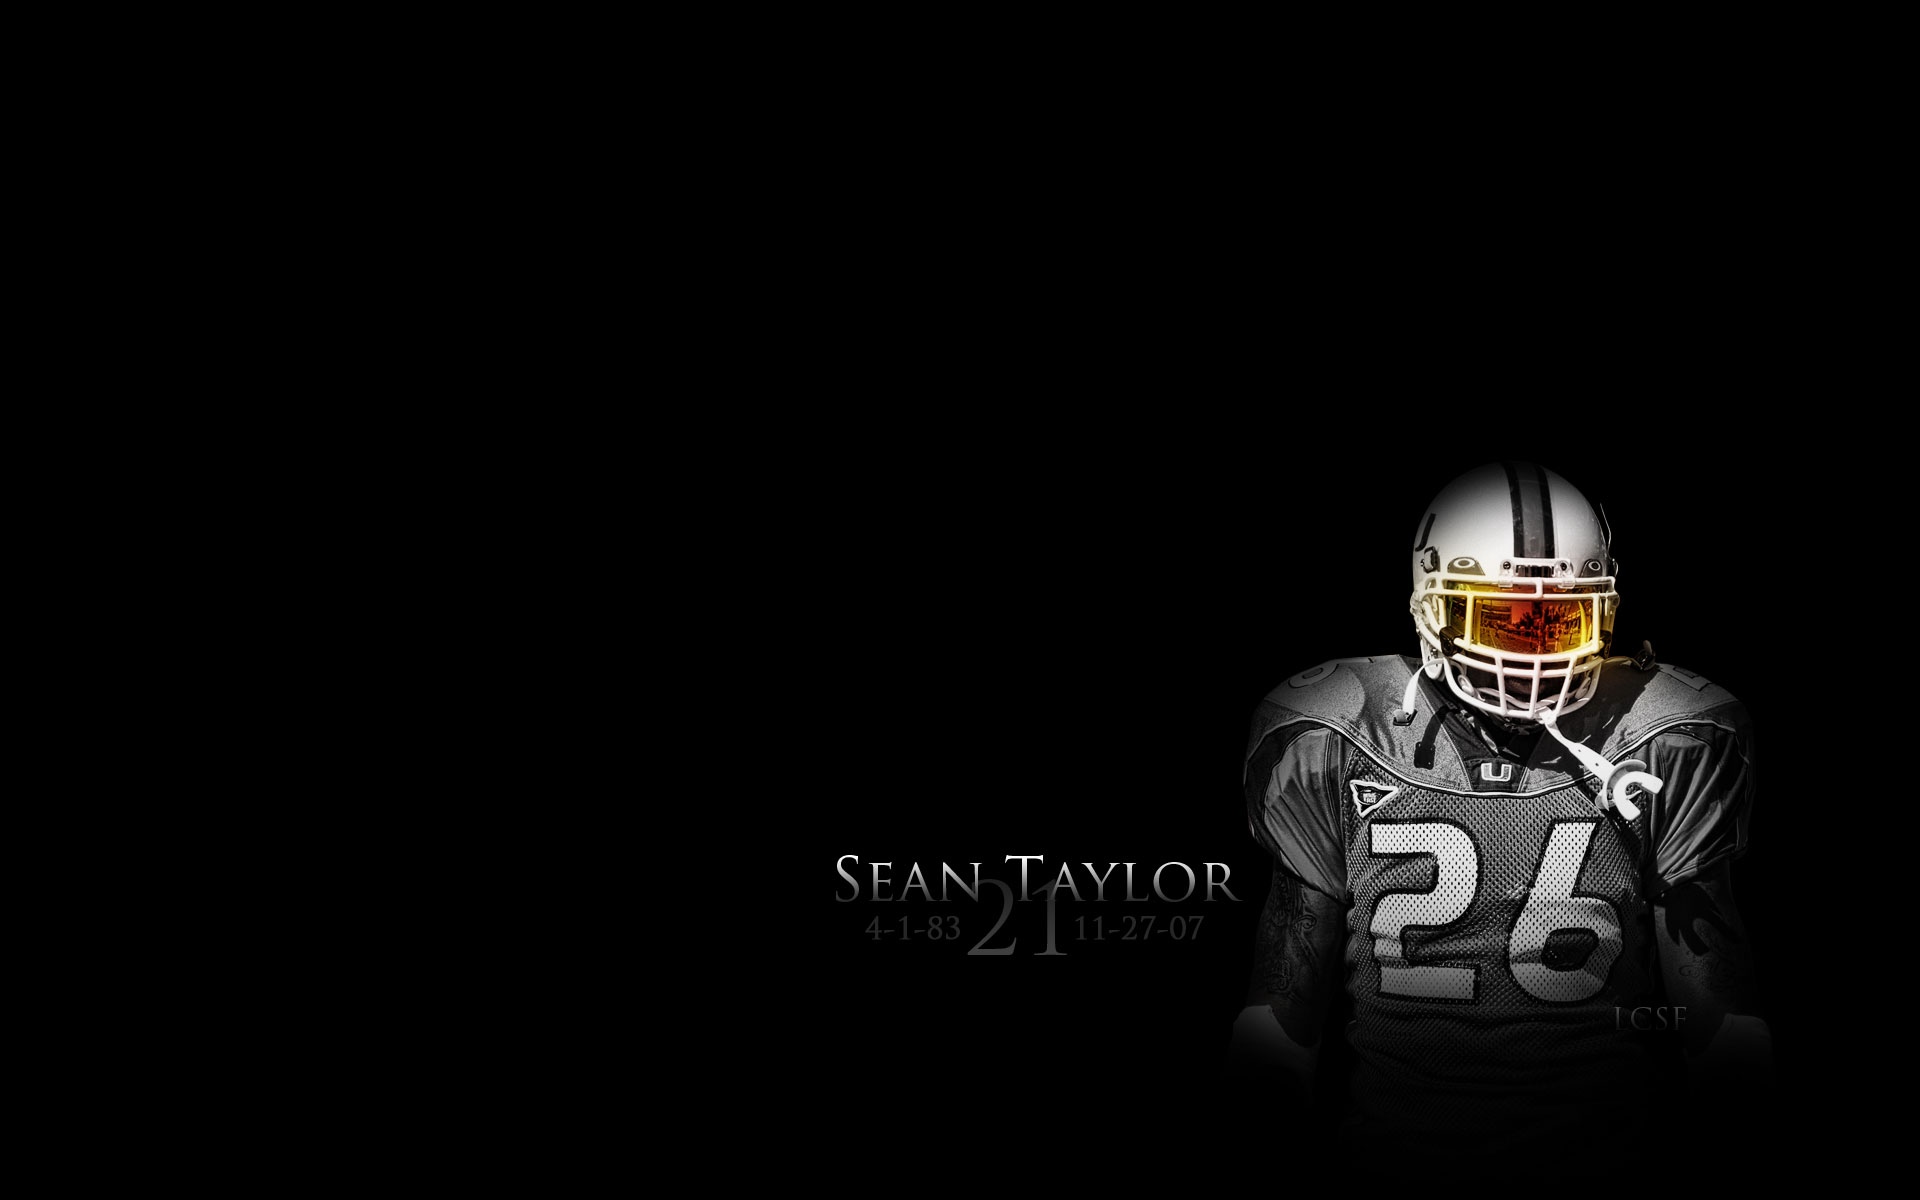 This New Sean Taylor Wallpaper E From Leftcoast Gfx Give Left Some